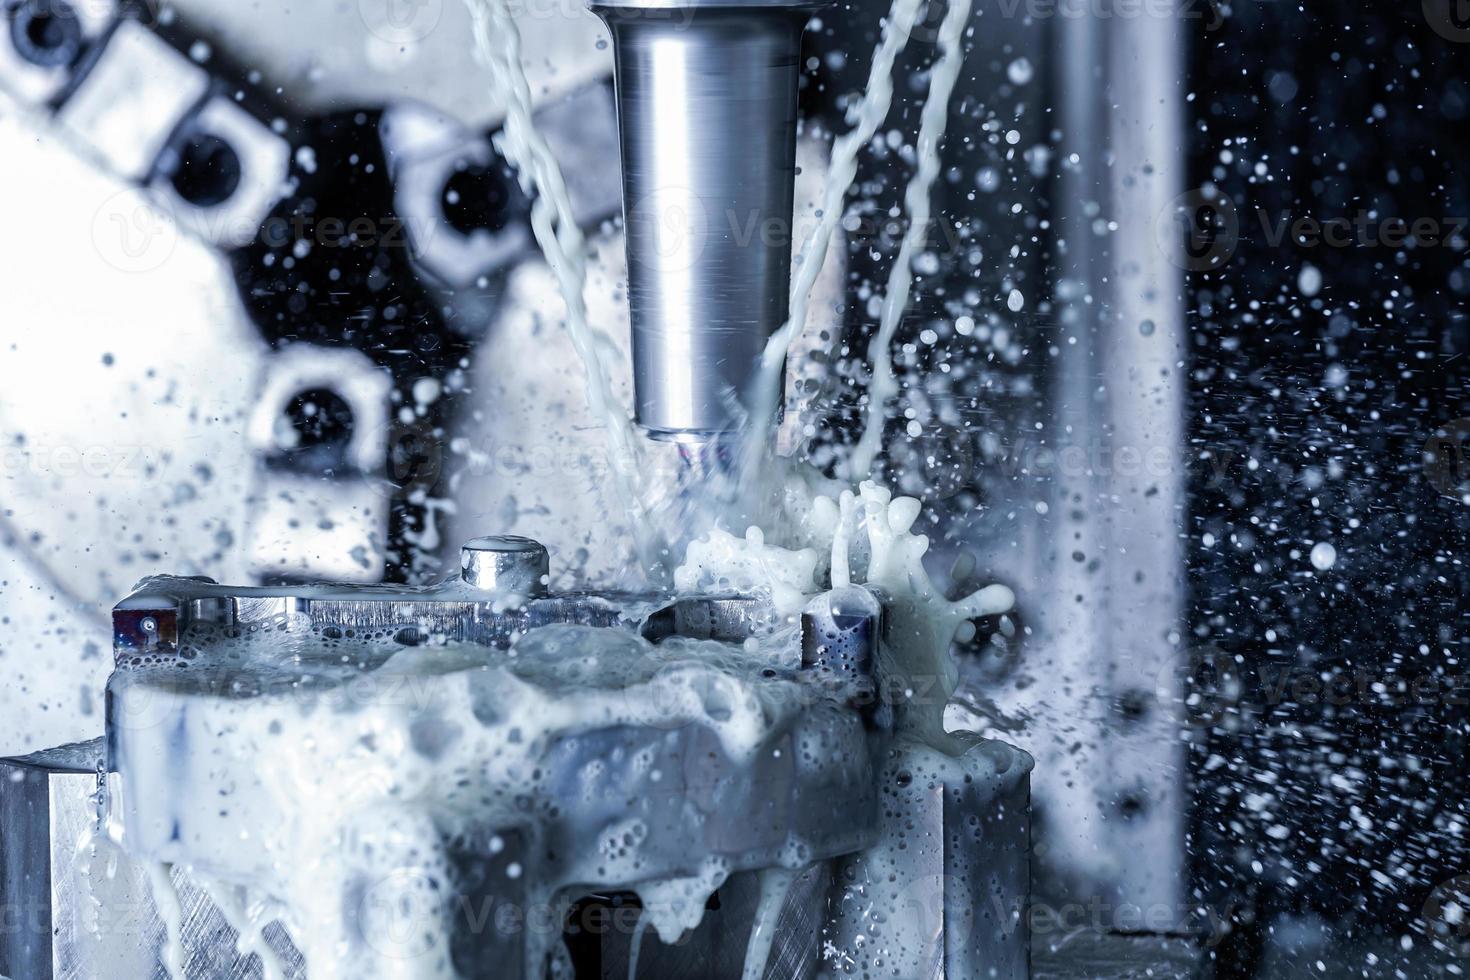 vertical cnc steel milling with external water coolant streams and splashes photo